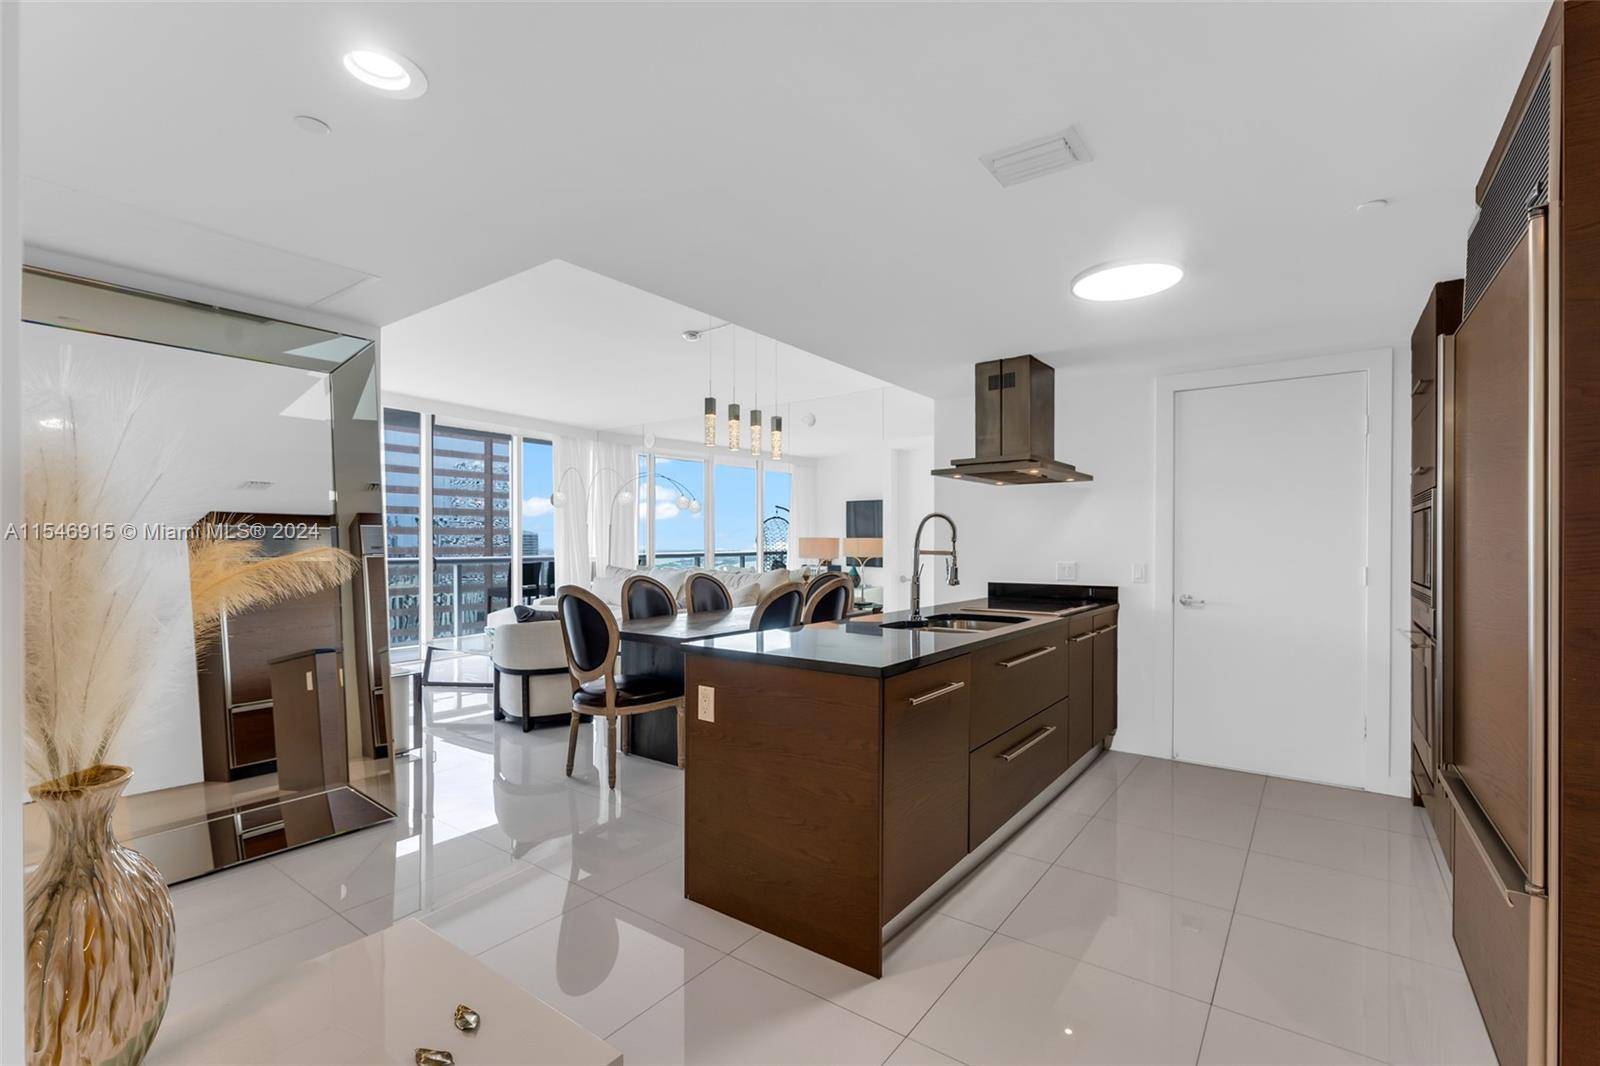 FABULOUS FURNISHED 2 BEDS 2 BATHS UNIT IN THE 35TH FLOOR AT THE FAMOUS ICON BRICKELL TOWER II WHITE PORCELAIN TILES AMAZING WATER AND CITY VIEWS THE ICON IS A ...